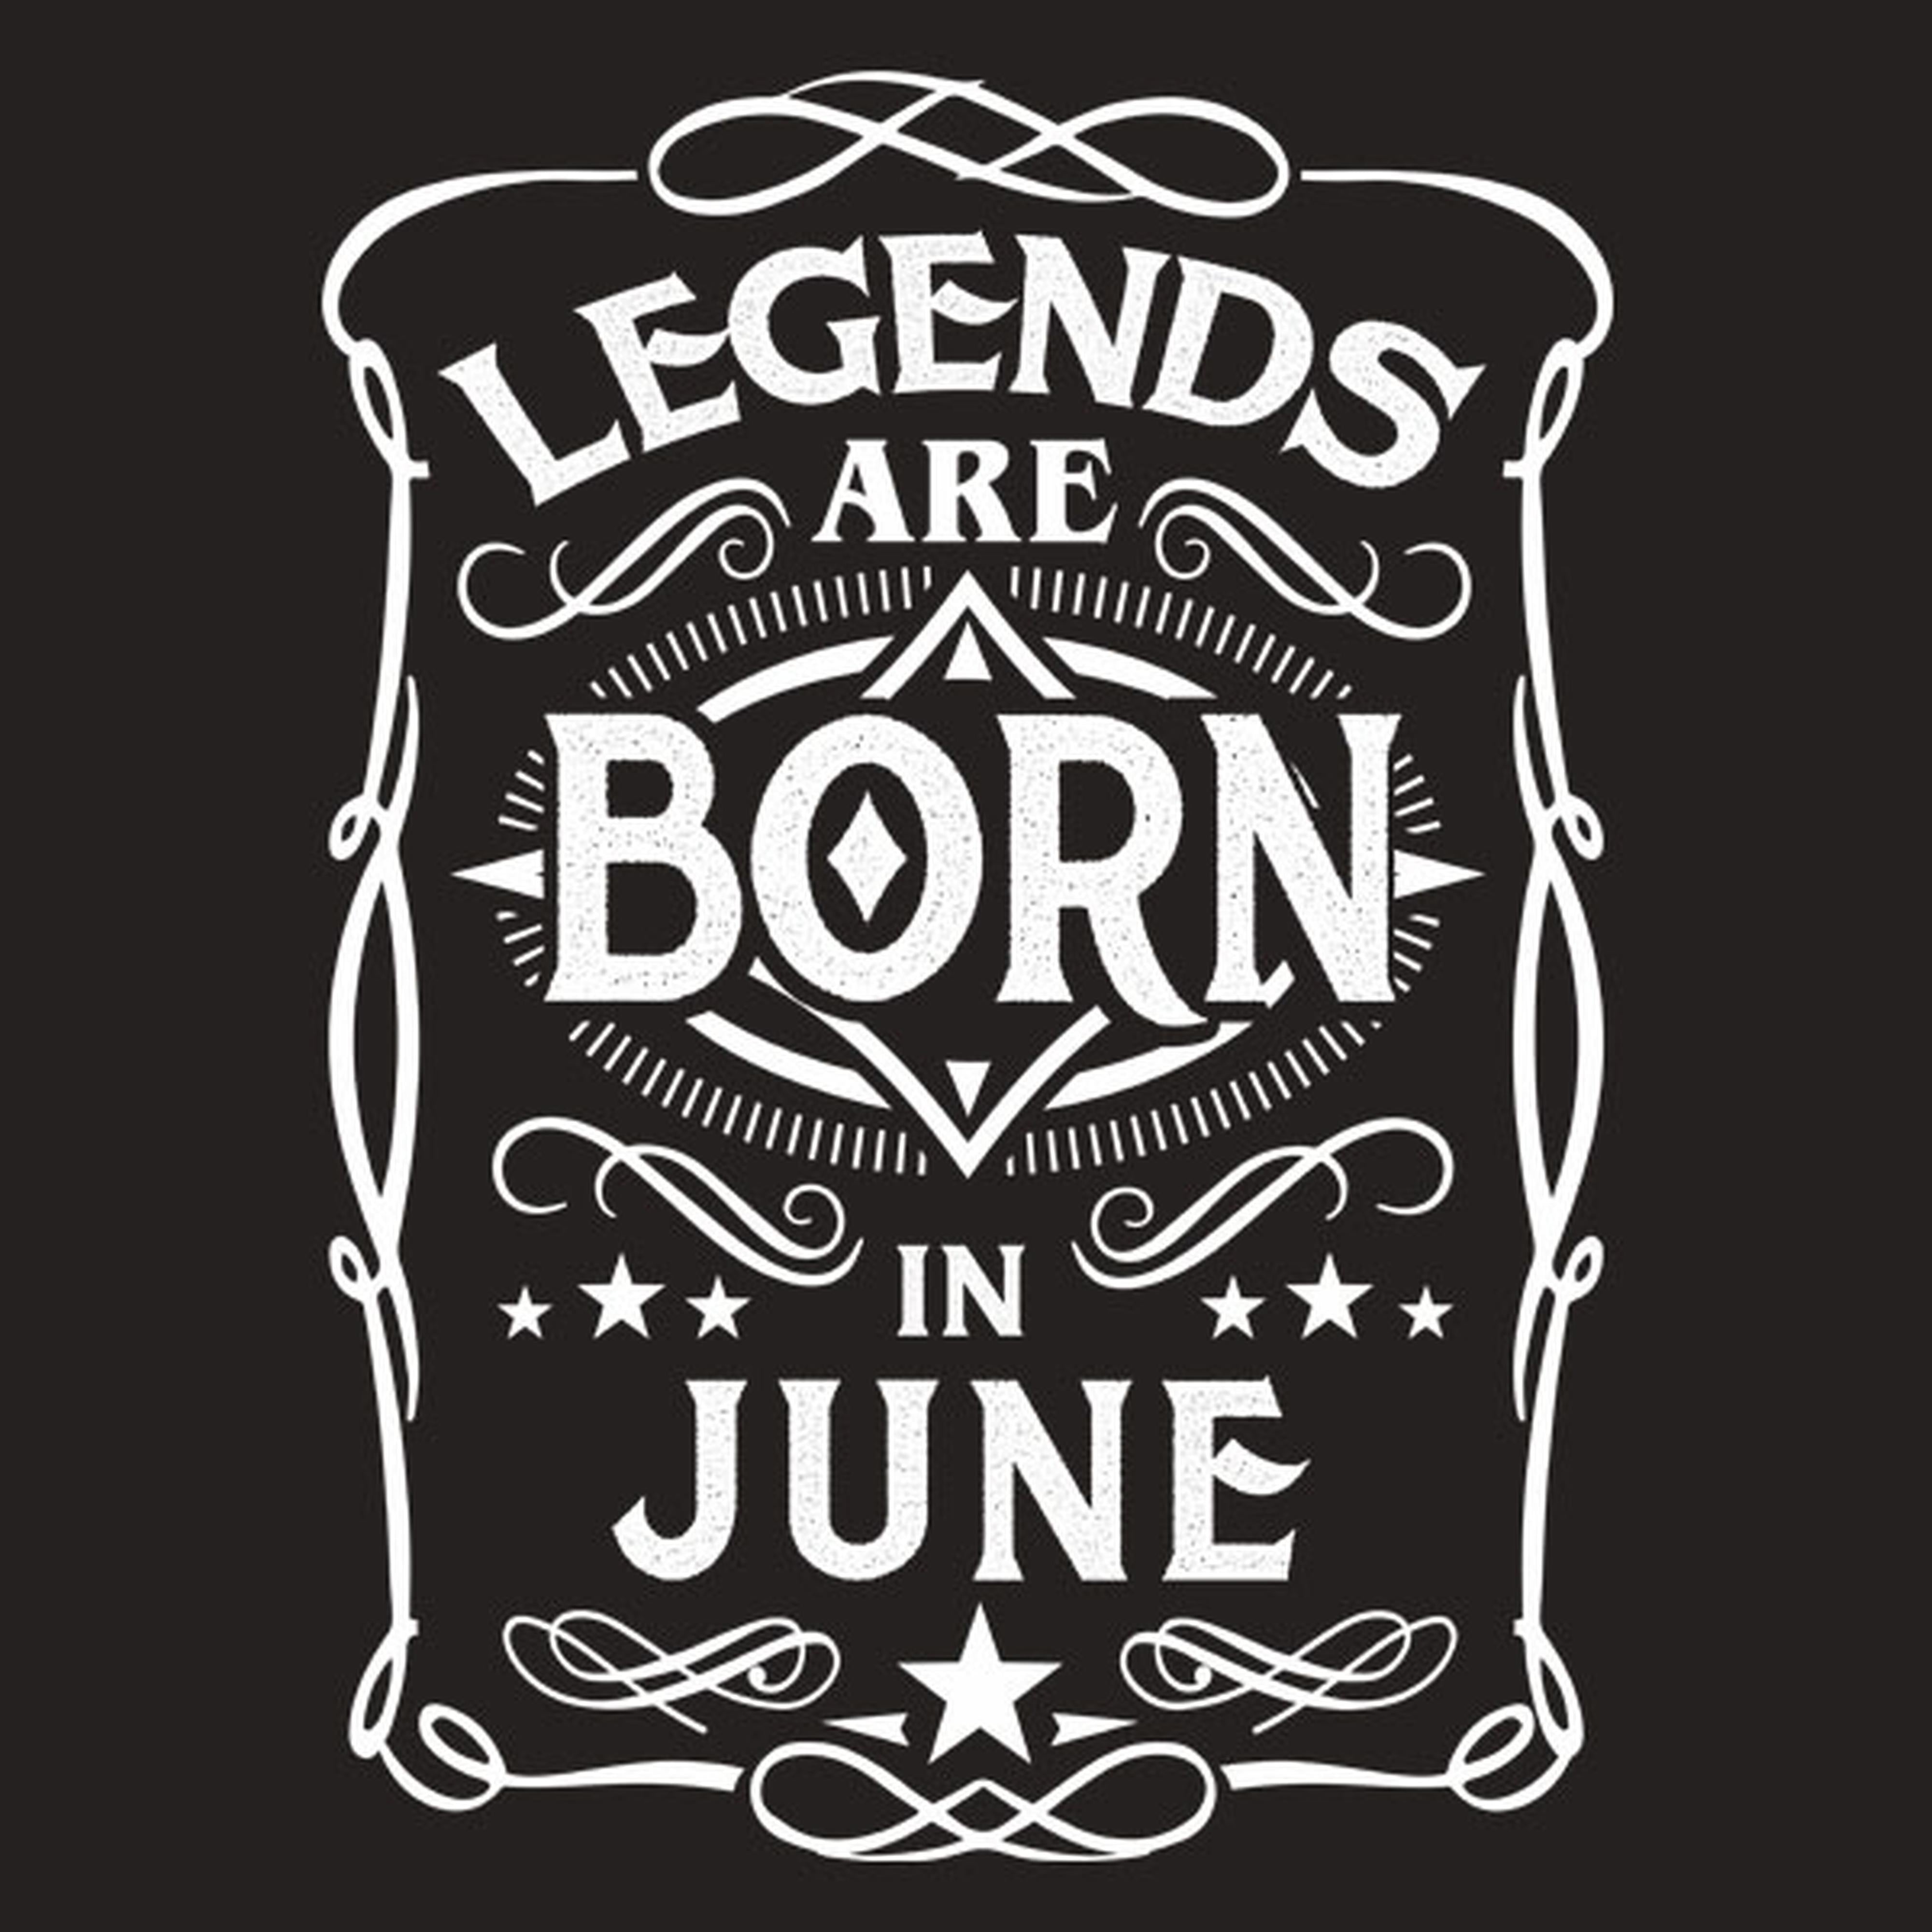 Legends are born in June - T-shirt